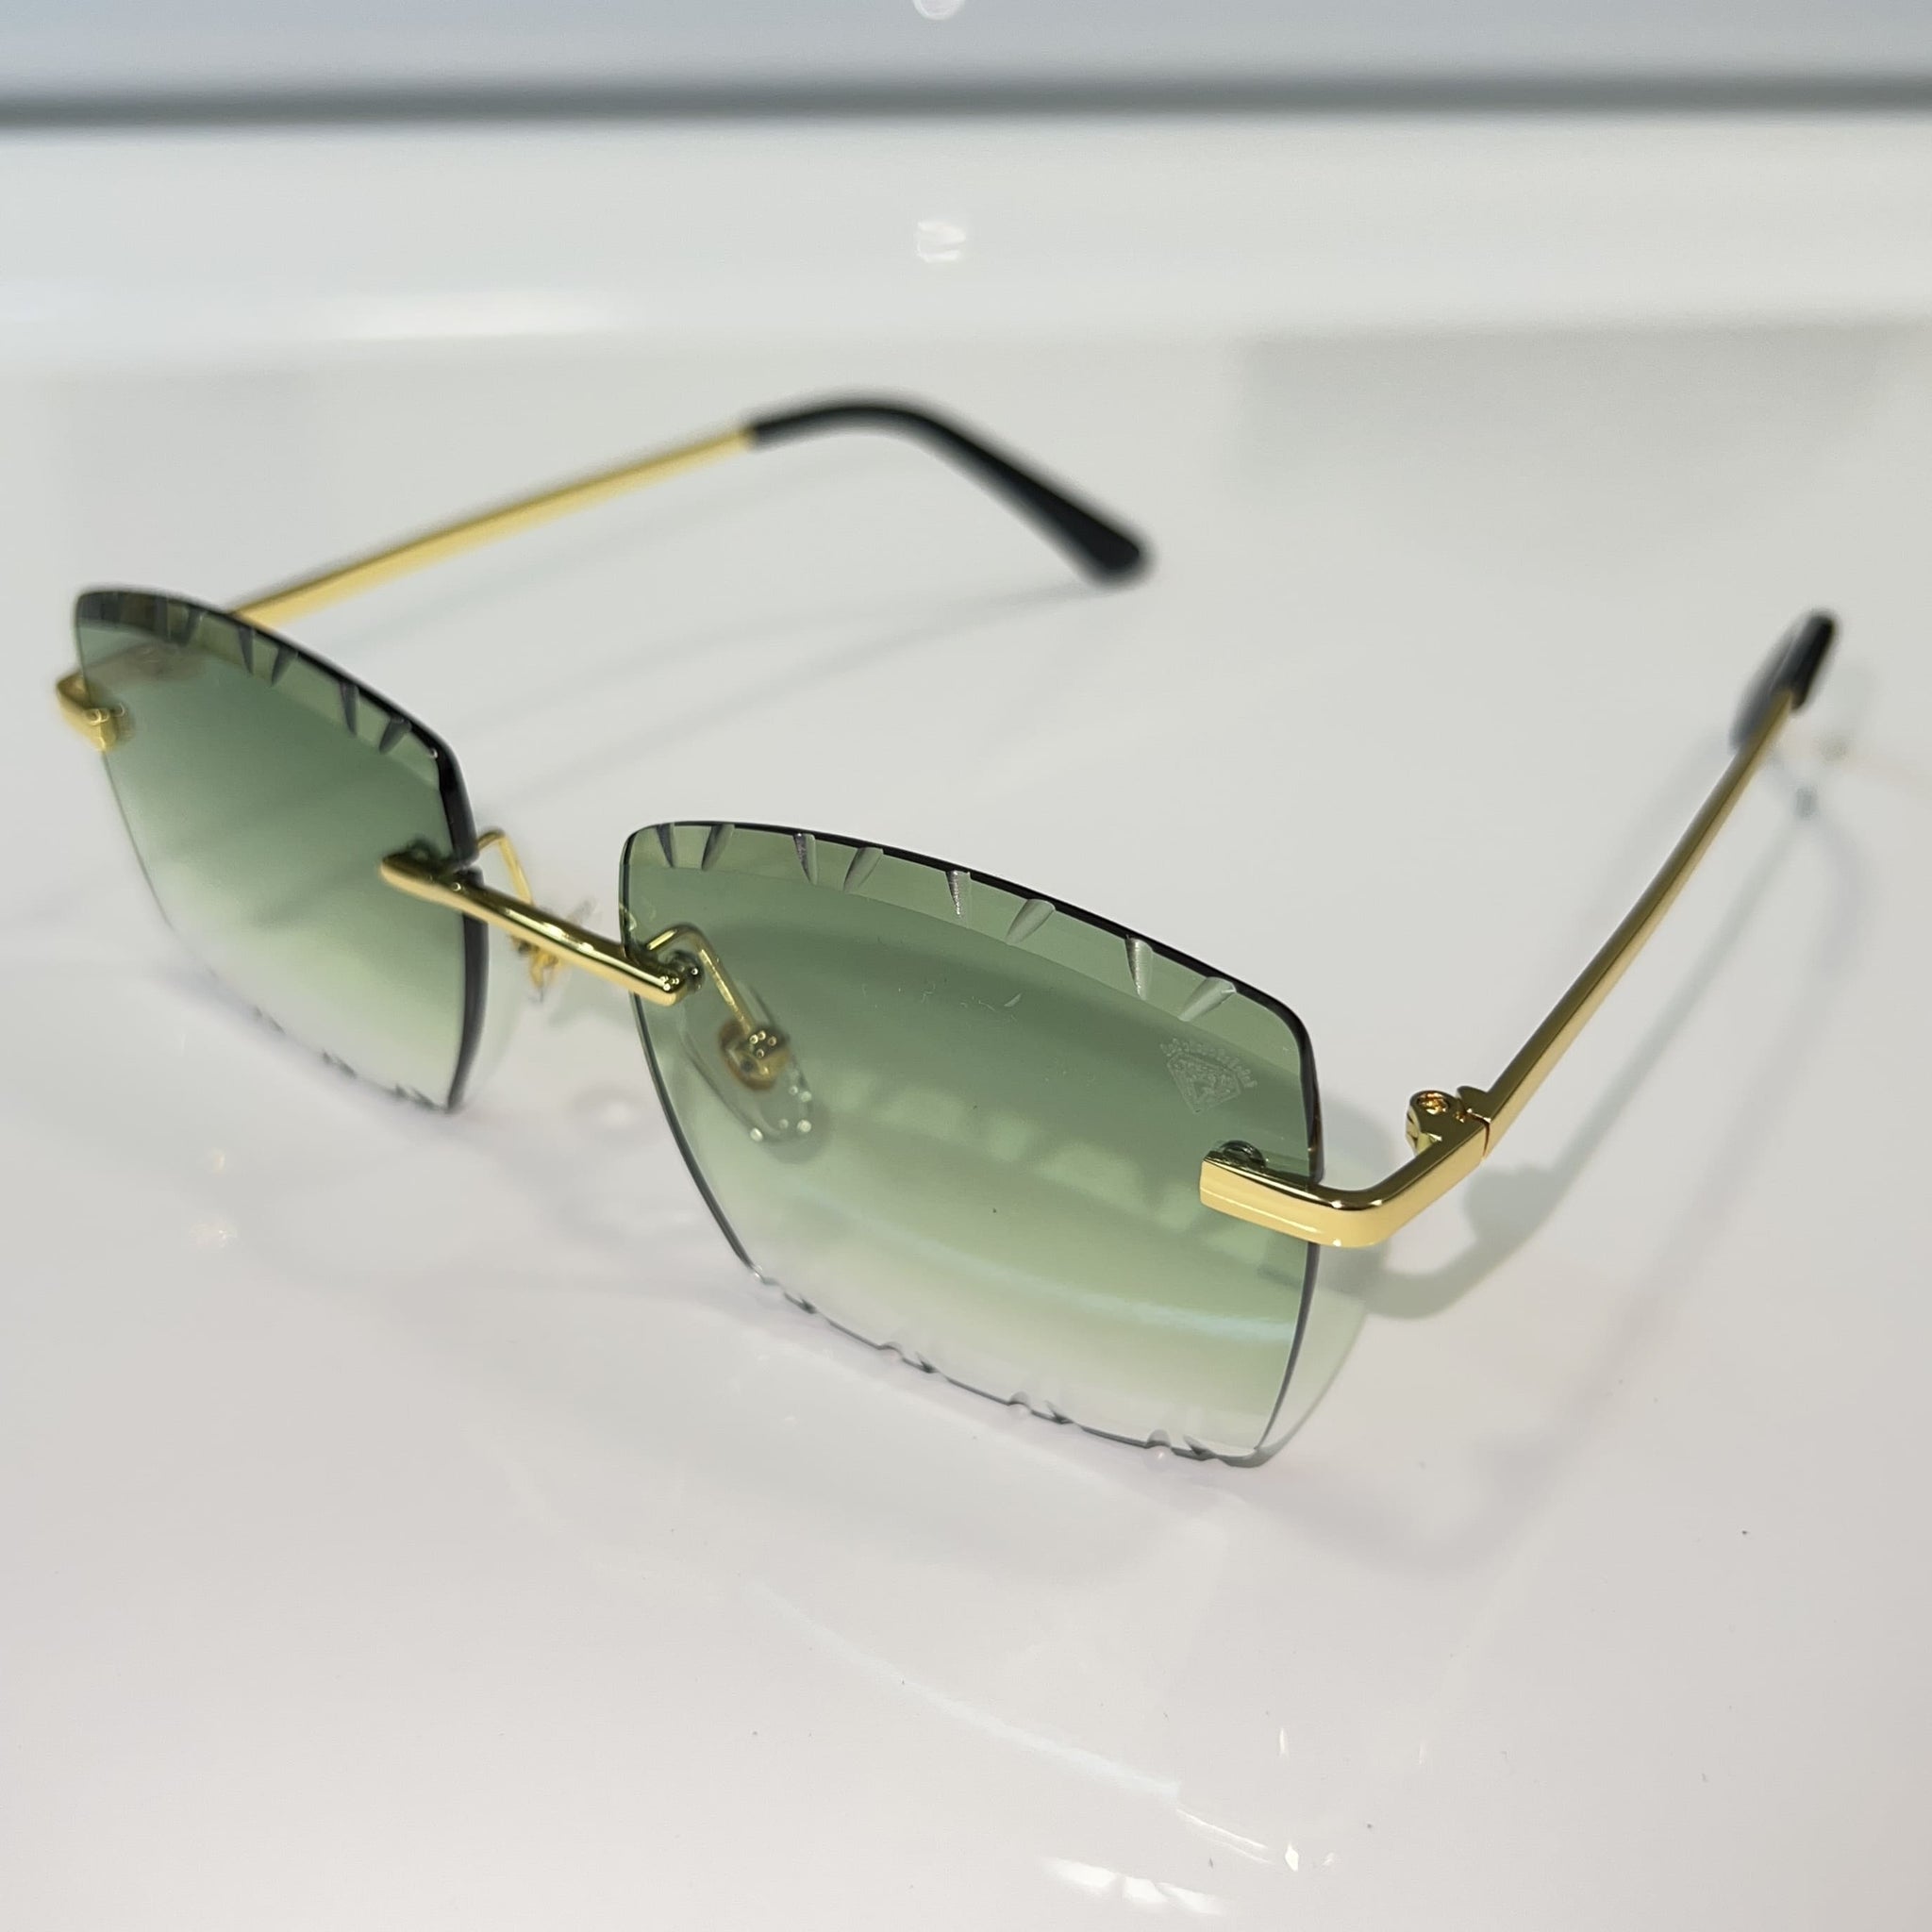 Dripcut Glasses - 14k gold plated - Green Shade - Sehgal Glasses